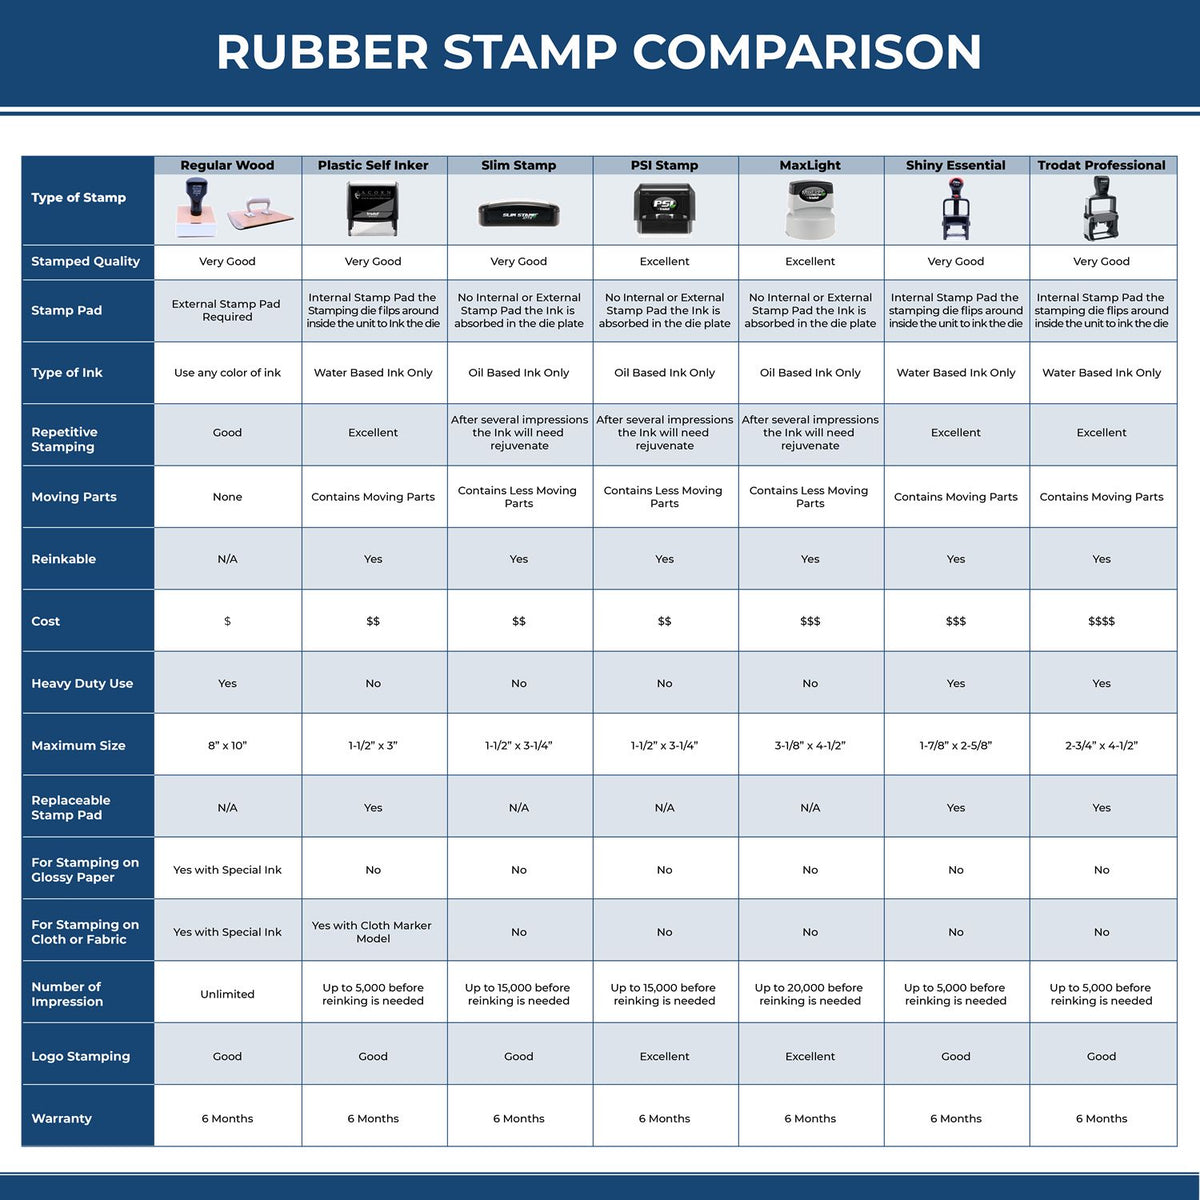 Large Self-Inking Admitted Stamp 4990S Rubber Stamp Comparison